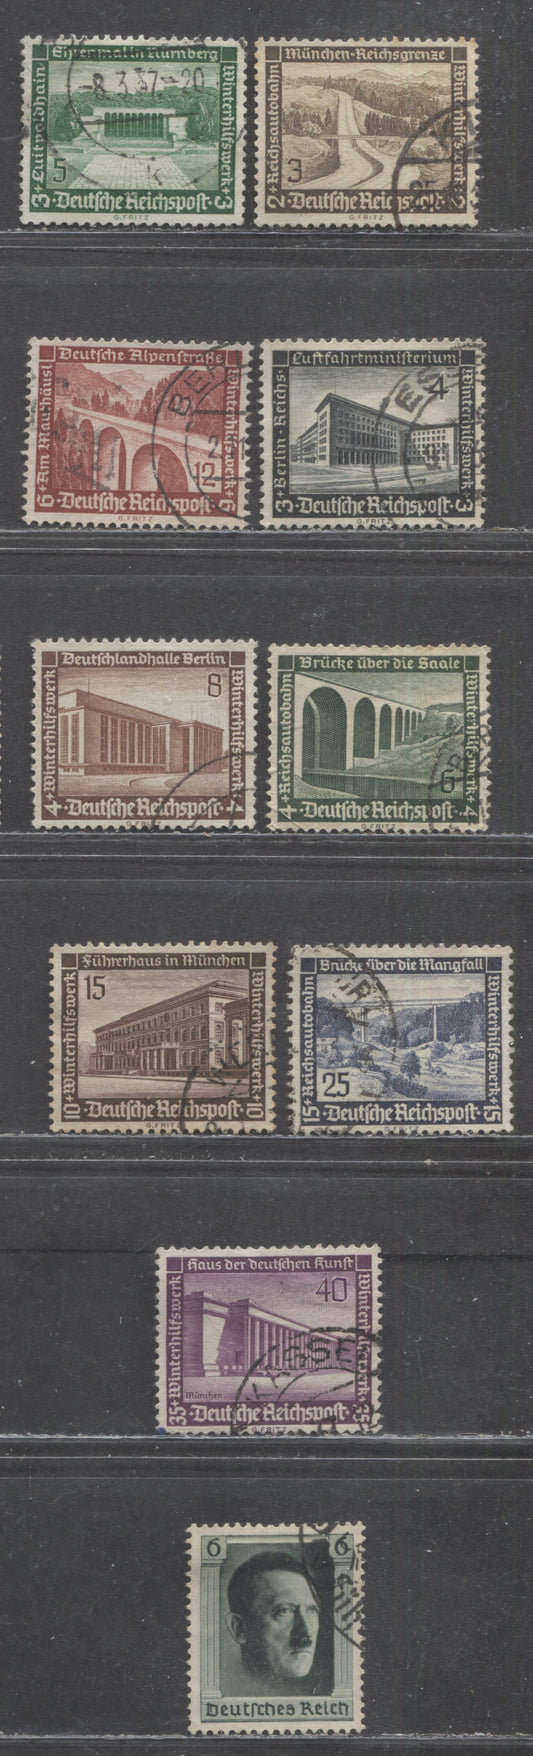 Lot 81 Germany SC#B93-B102a 1936-1937 Architecture Semi Postals & Hitler's 48th Birthday Issues, 10 Very Fine Used Singles, Click on Listing to See ALL Pictures, 2022 Scott Classic Cat. $17.85